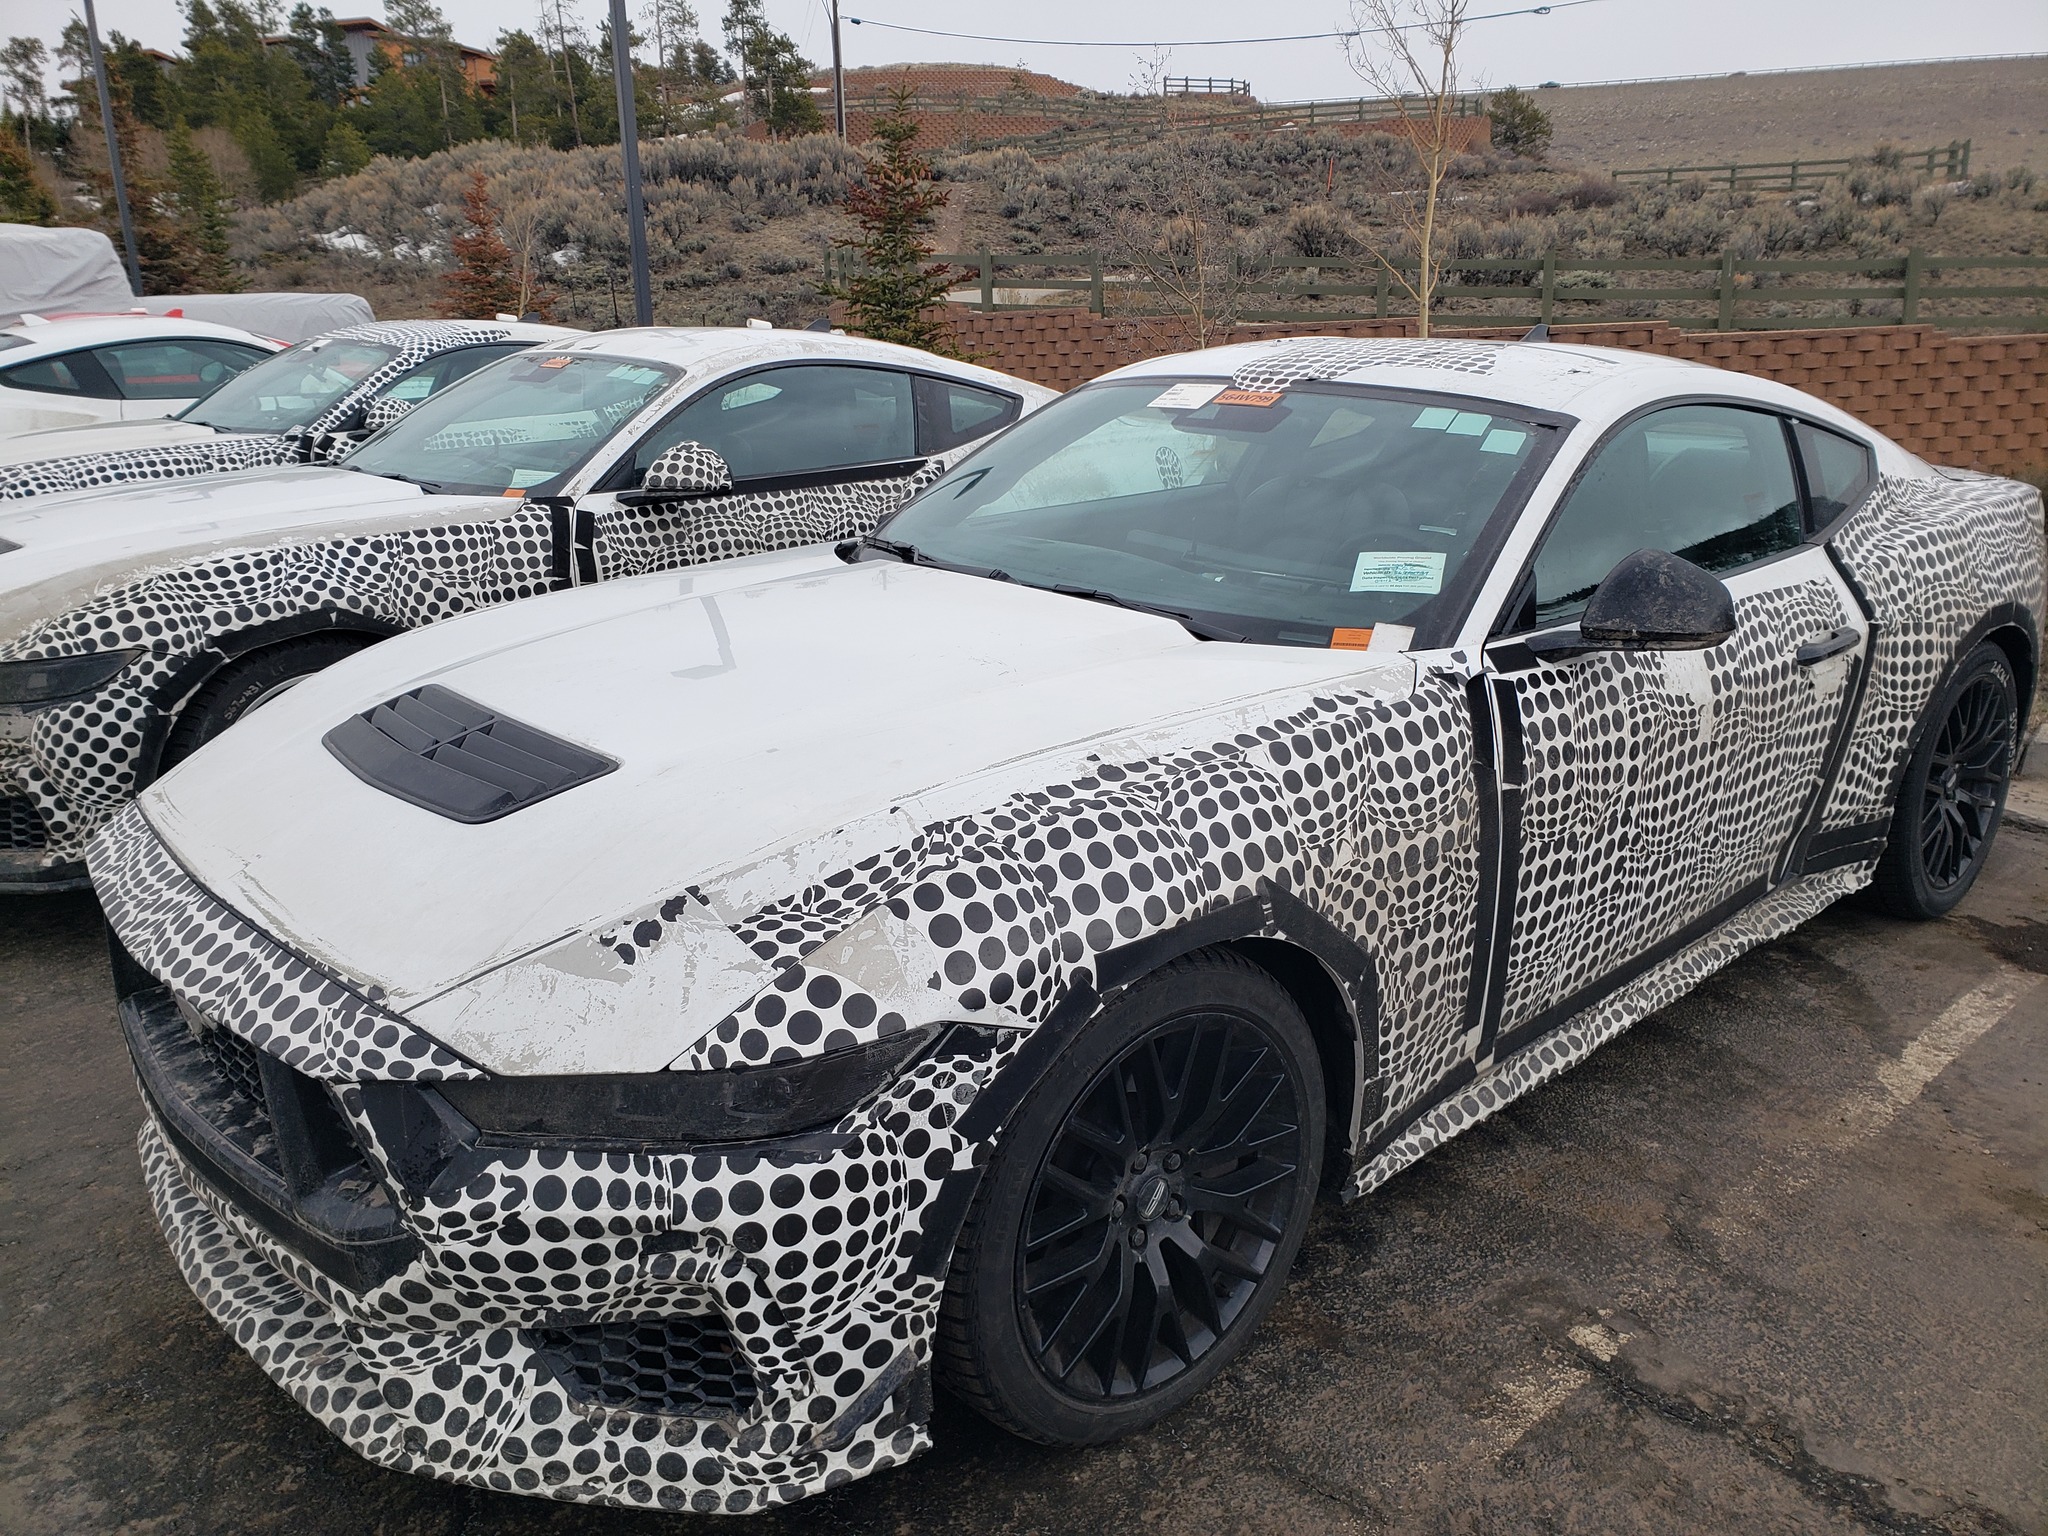 S650 Mustang S650 Mustang global-market prototypes testing in Colorado S650 Camo 4